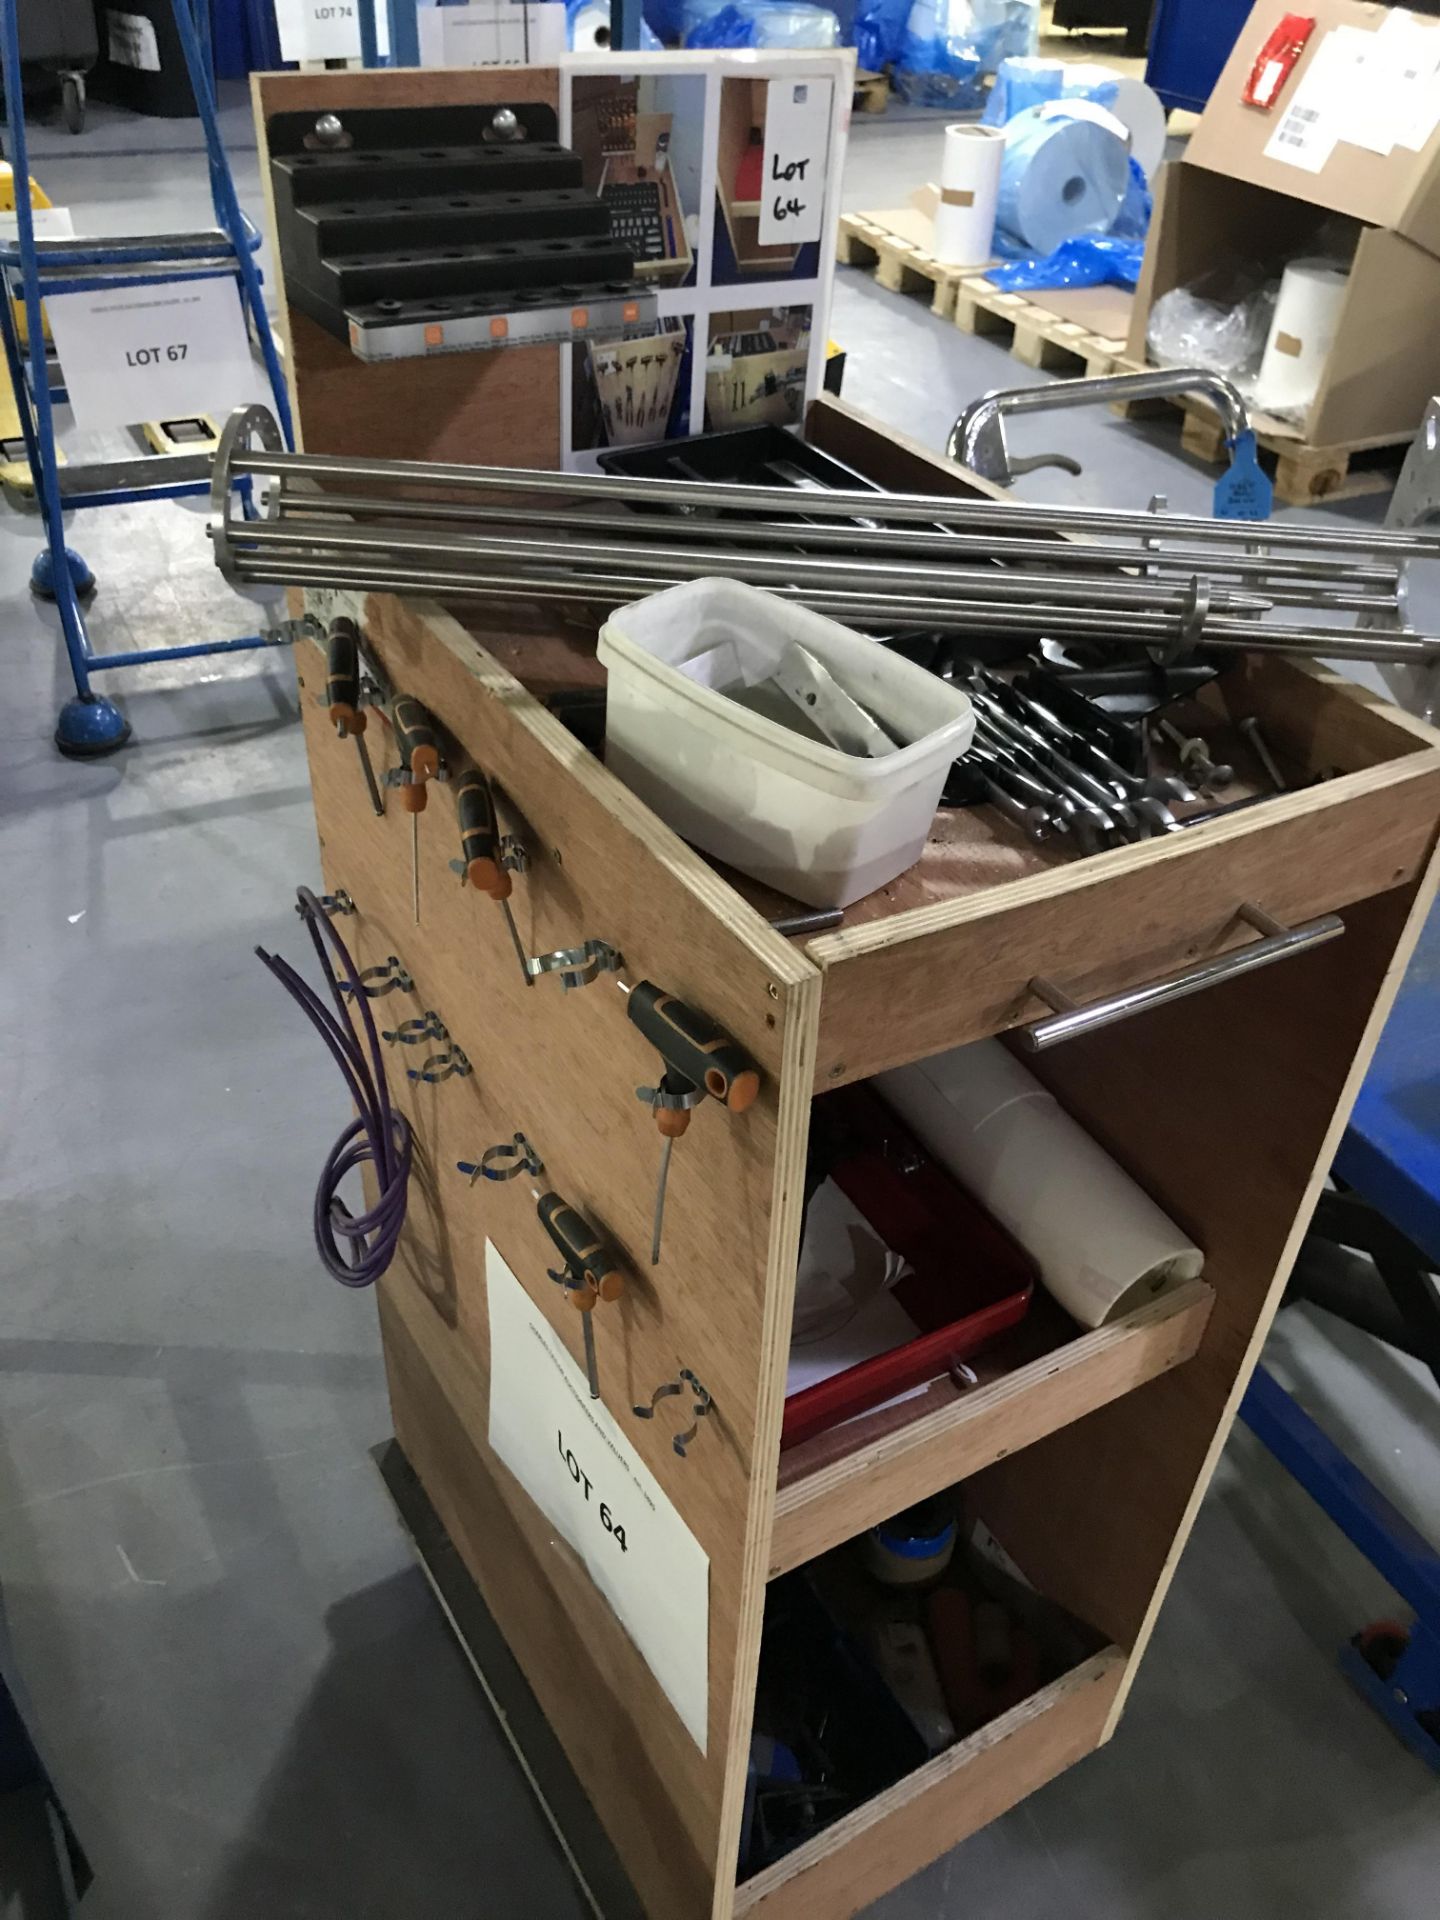 MOBILE WOODEN STORAGE UNIT AND CONTENTS OF ASSORTED TOOLS